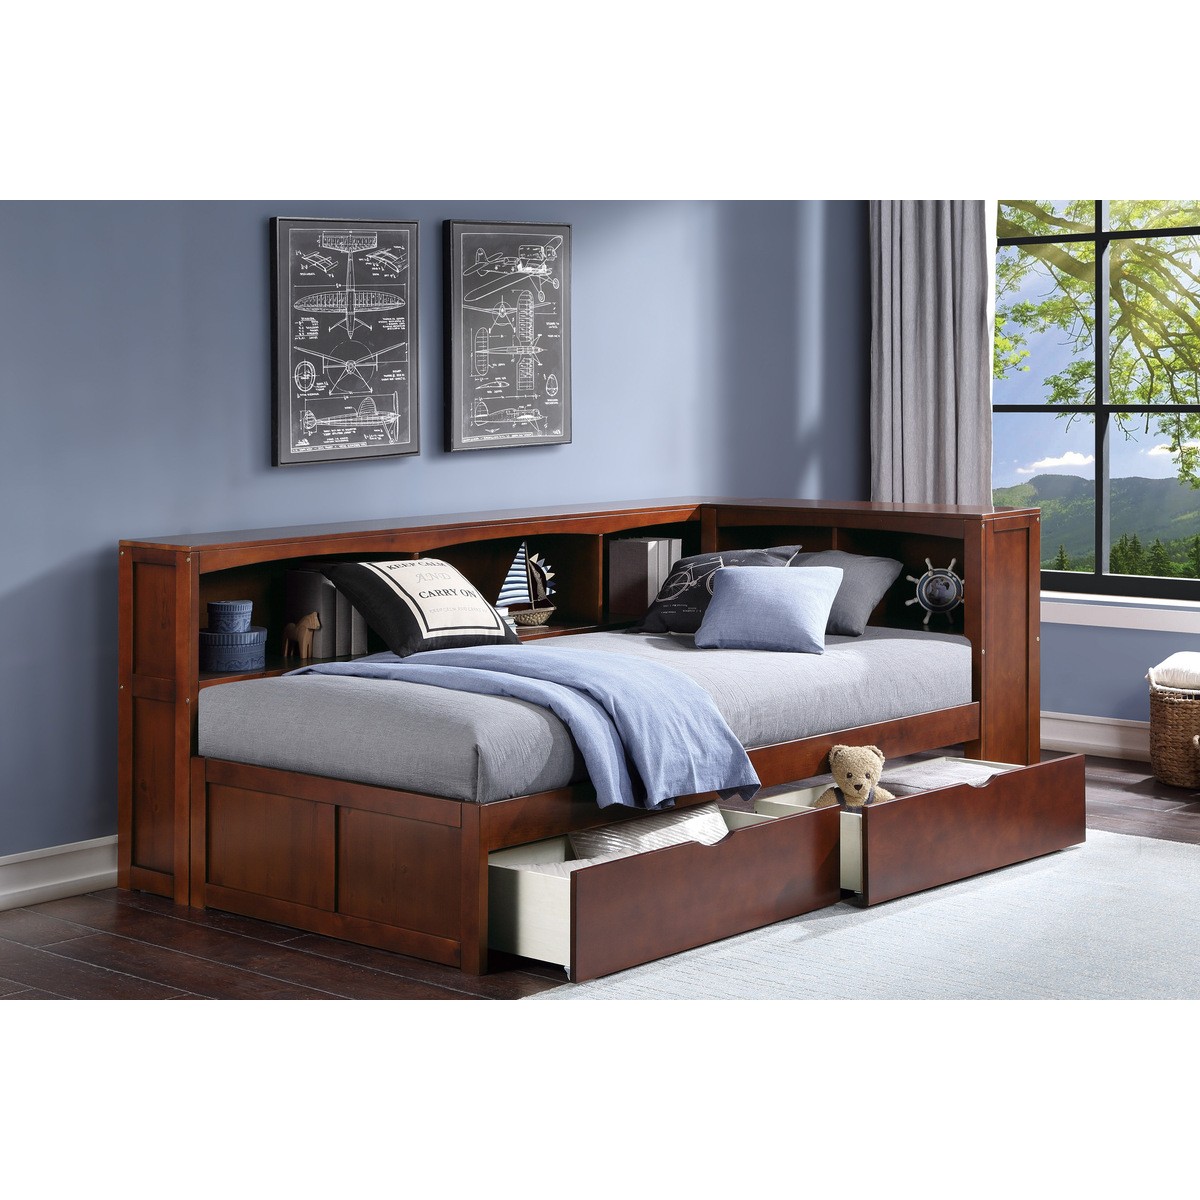 B2013bcdc 1bct twin bookcase corner bed with storage boxes